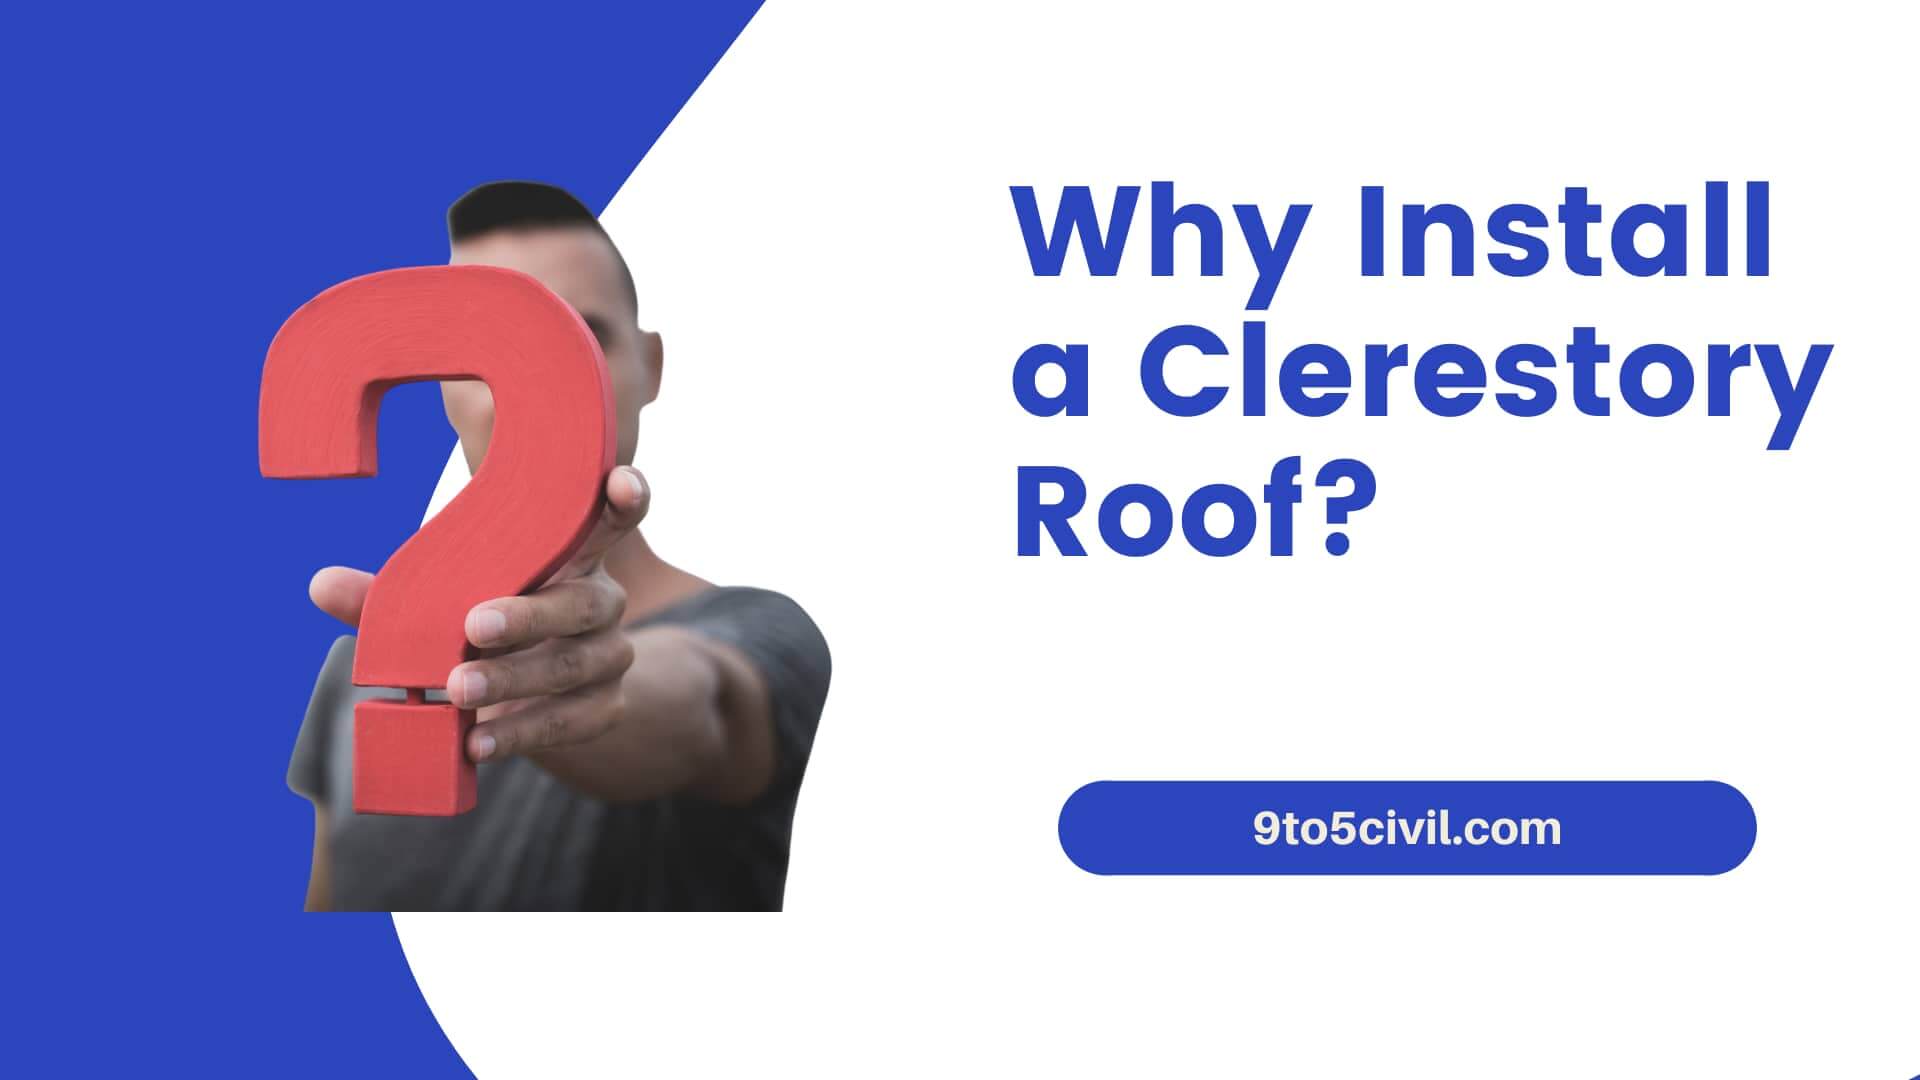 Why Install a Clerestory Roof